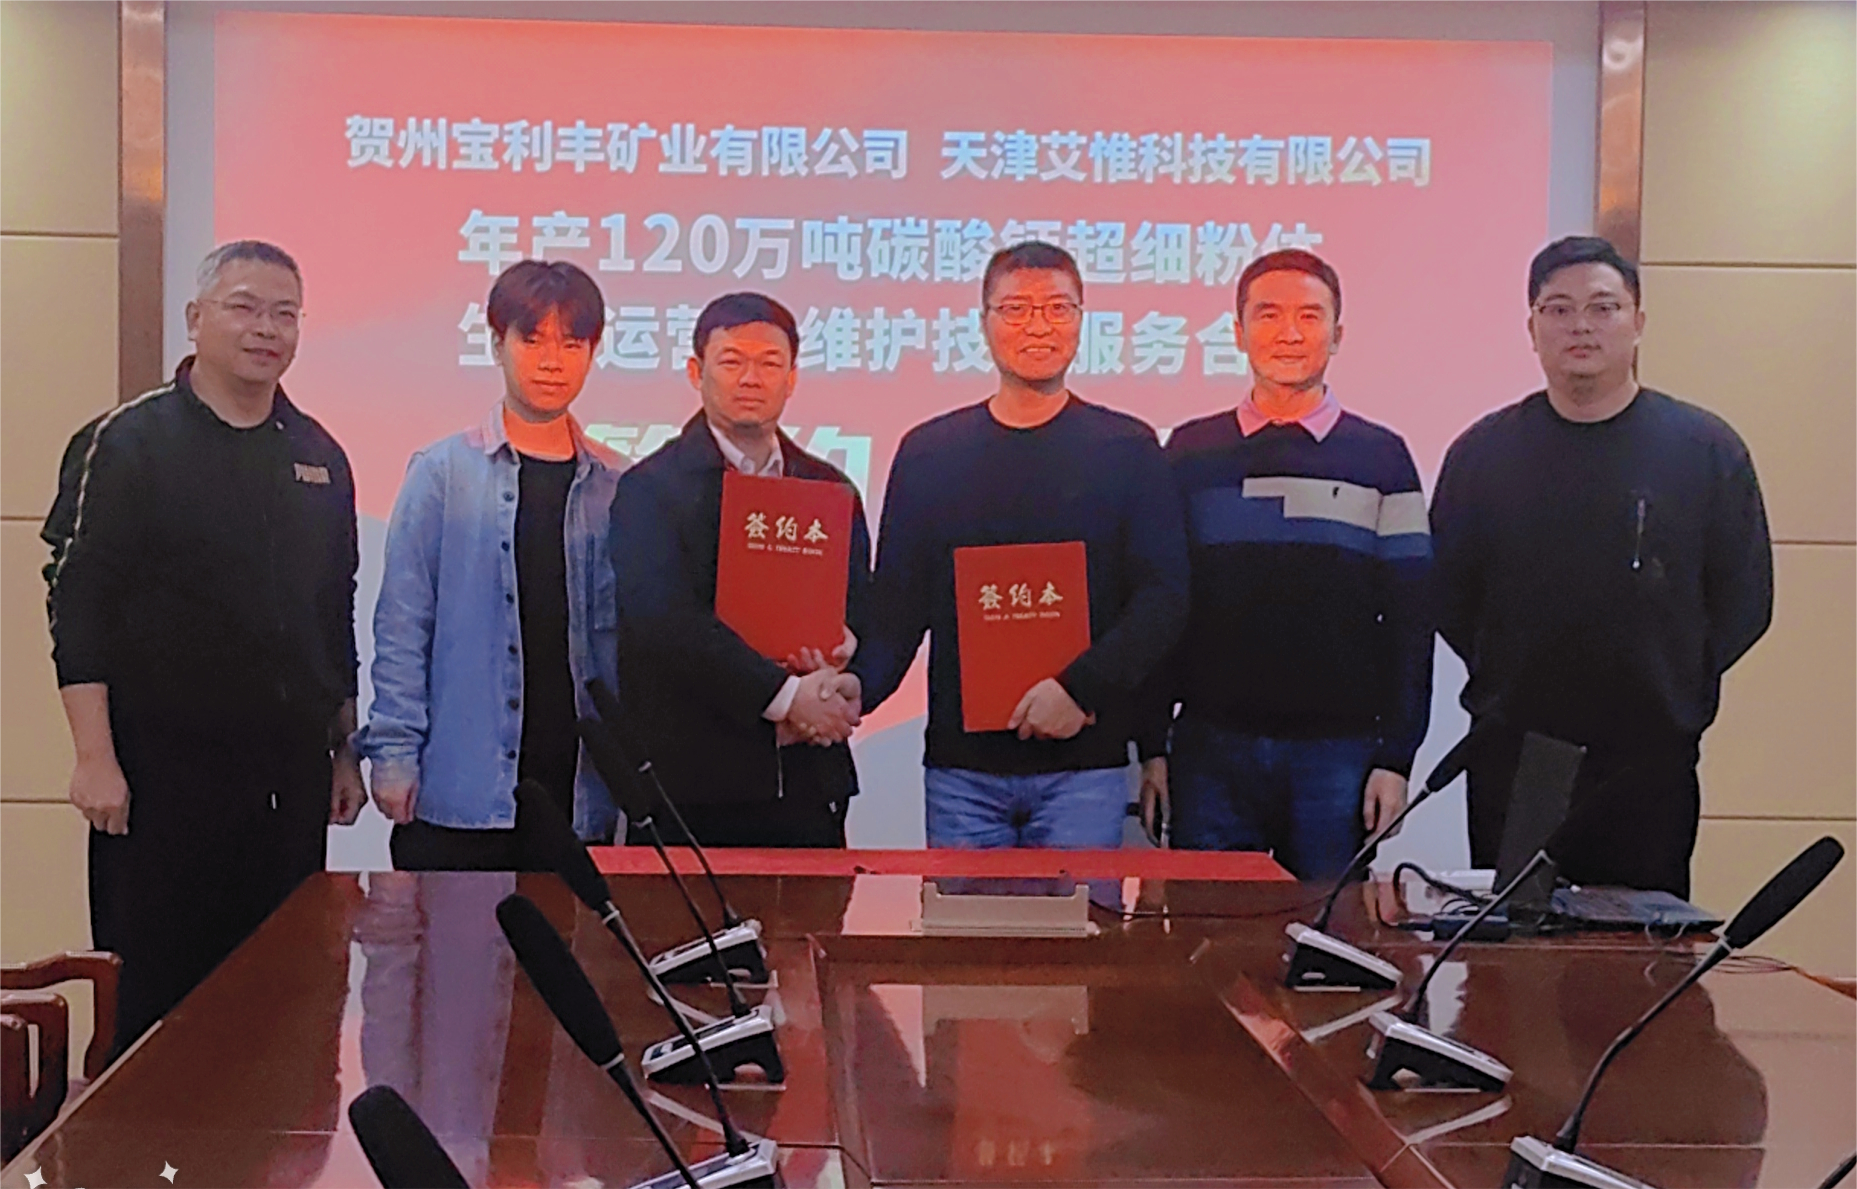 O&M contract signed with Jiankai Group